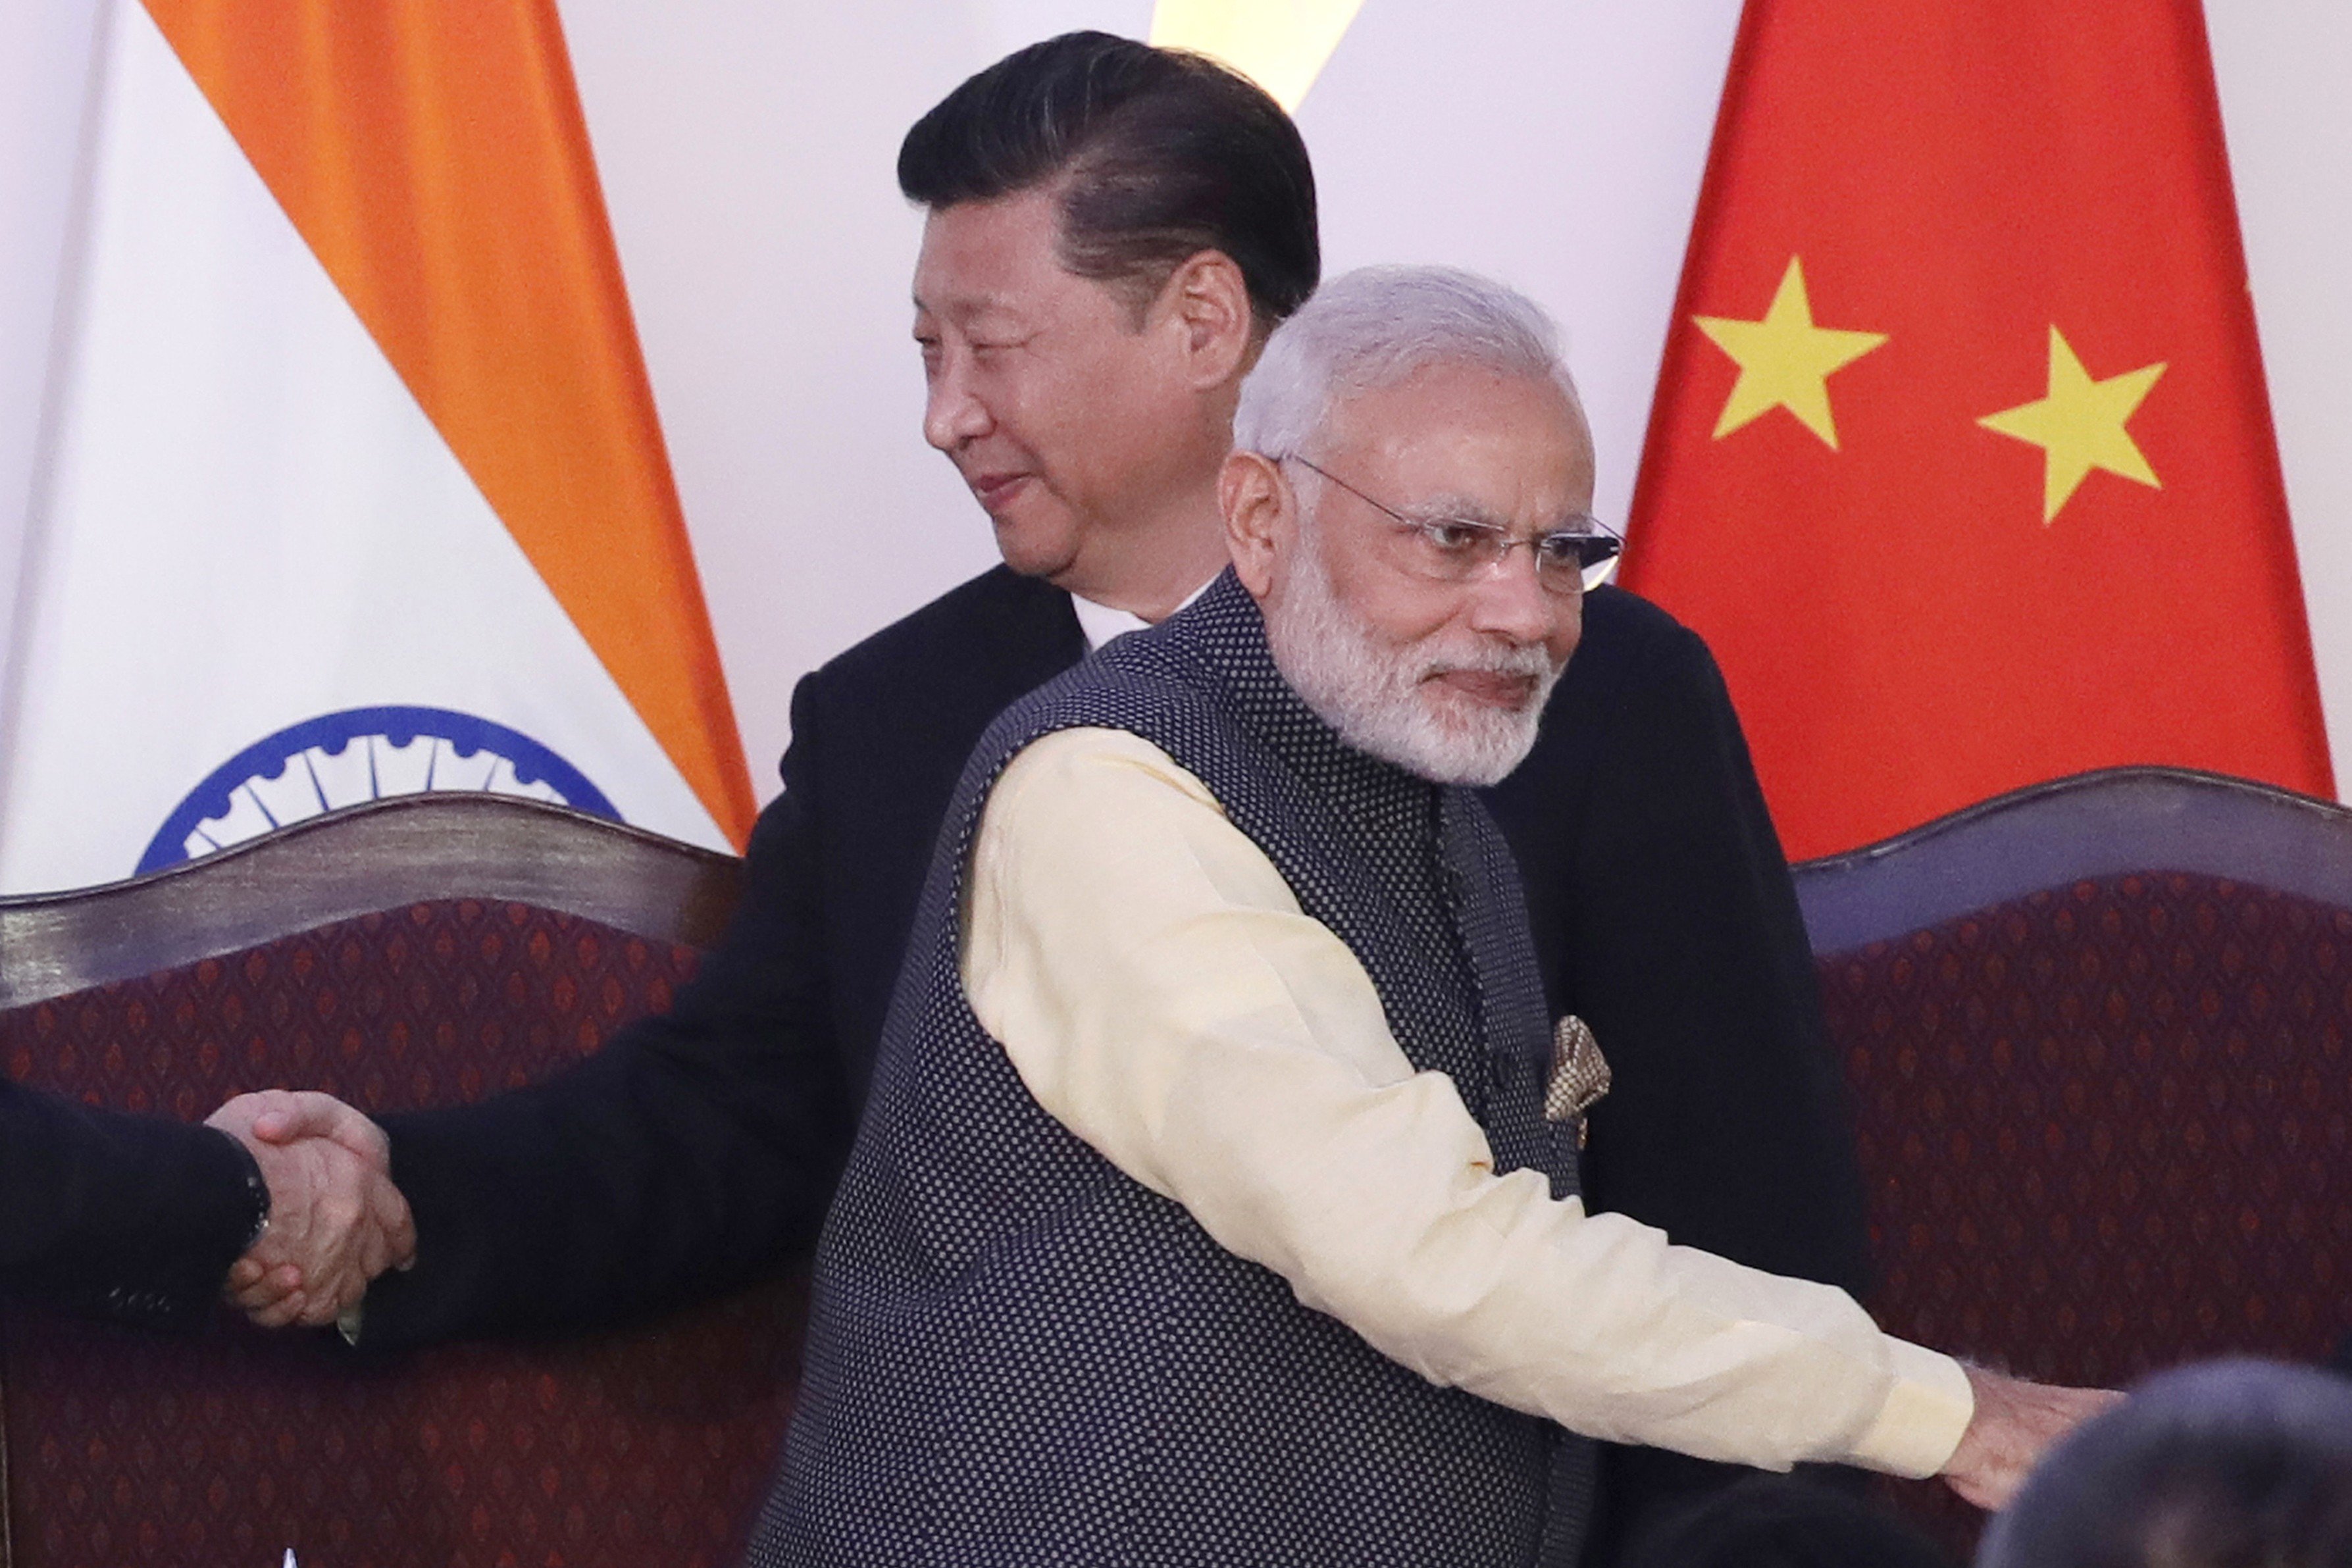 Chinese President Xi Jinping (left) and Indian Prime Minister Narendra Modi shake hands with leaders at last year’s BRICS summit in Goa. The pair last met on the sidelines of the G20 in Hamburg. Photo: AP